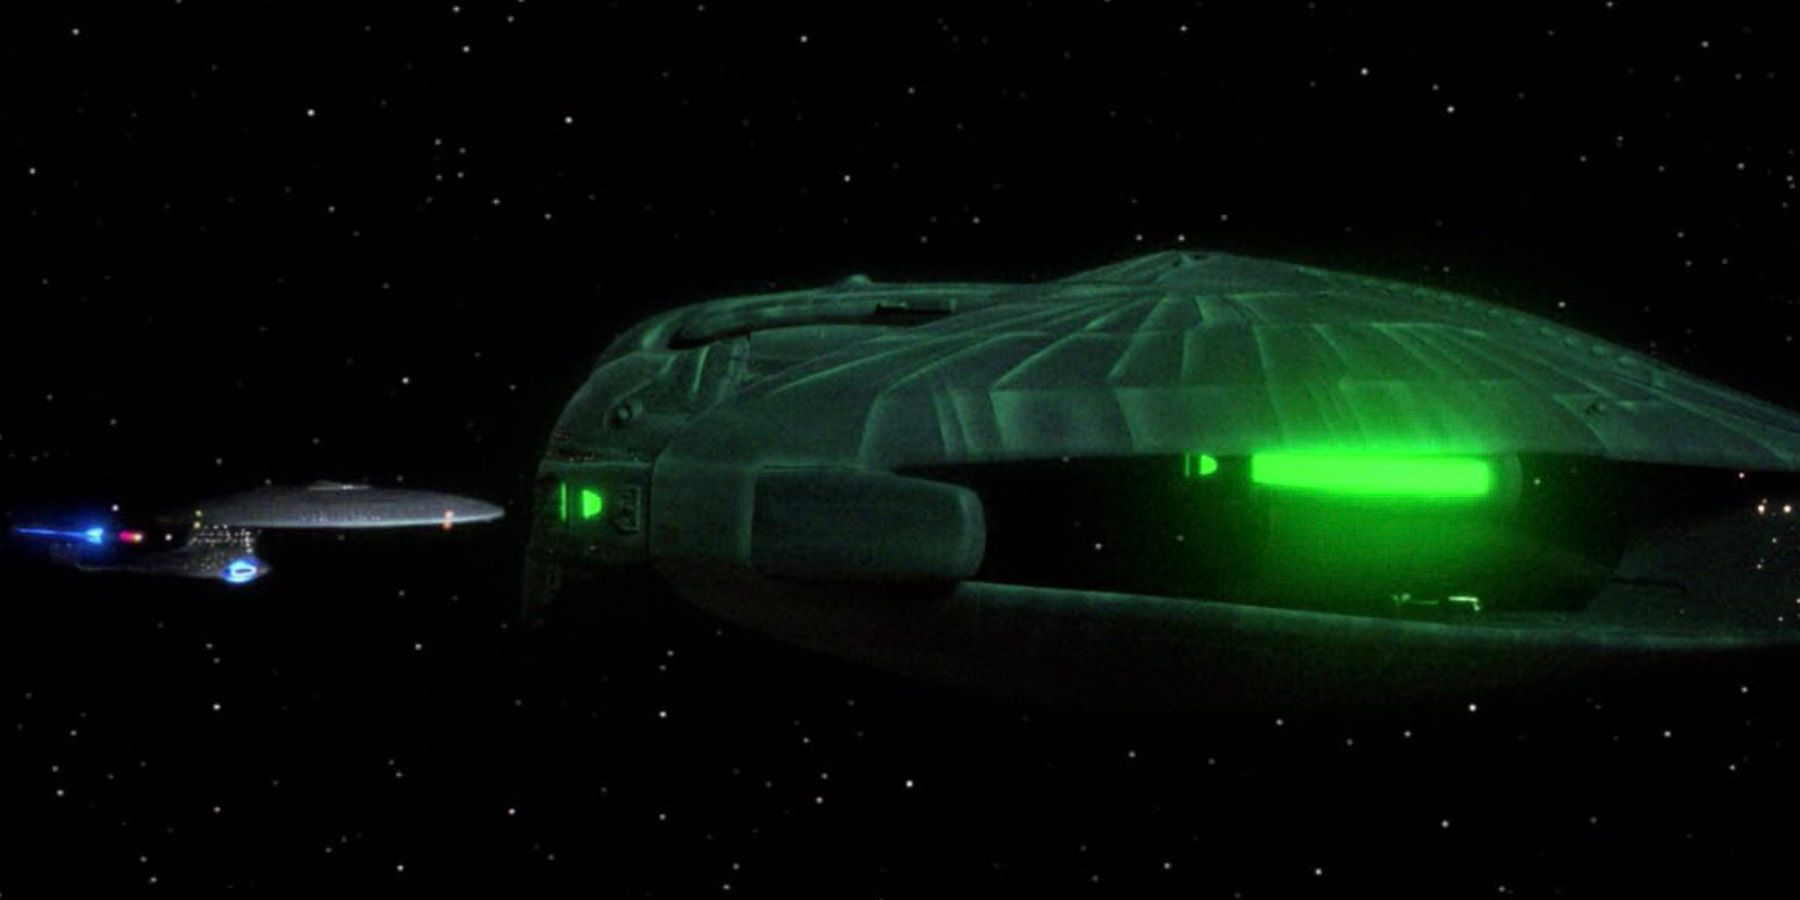 Enterprise-D Encounters a Romulan Warbird for the first time in The Neutral Zone